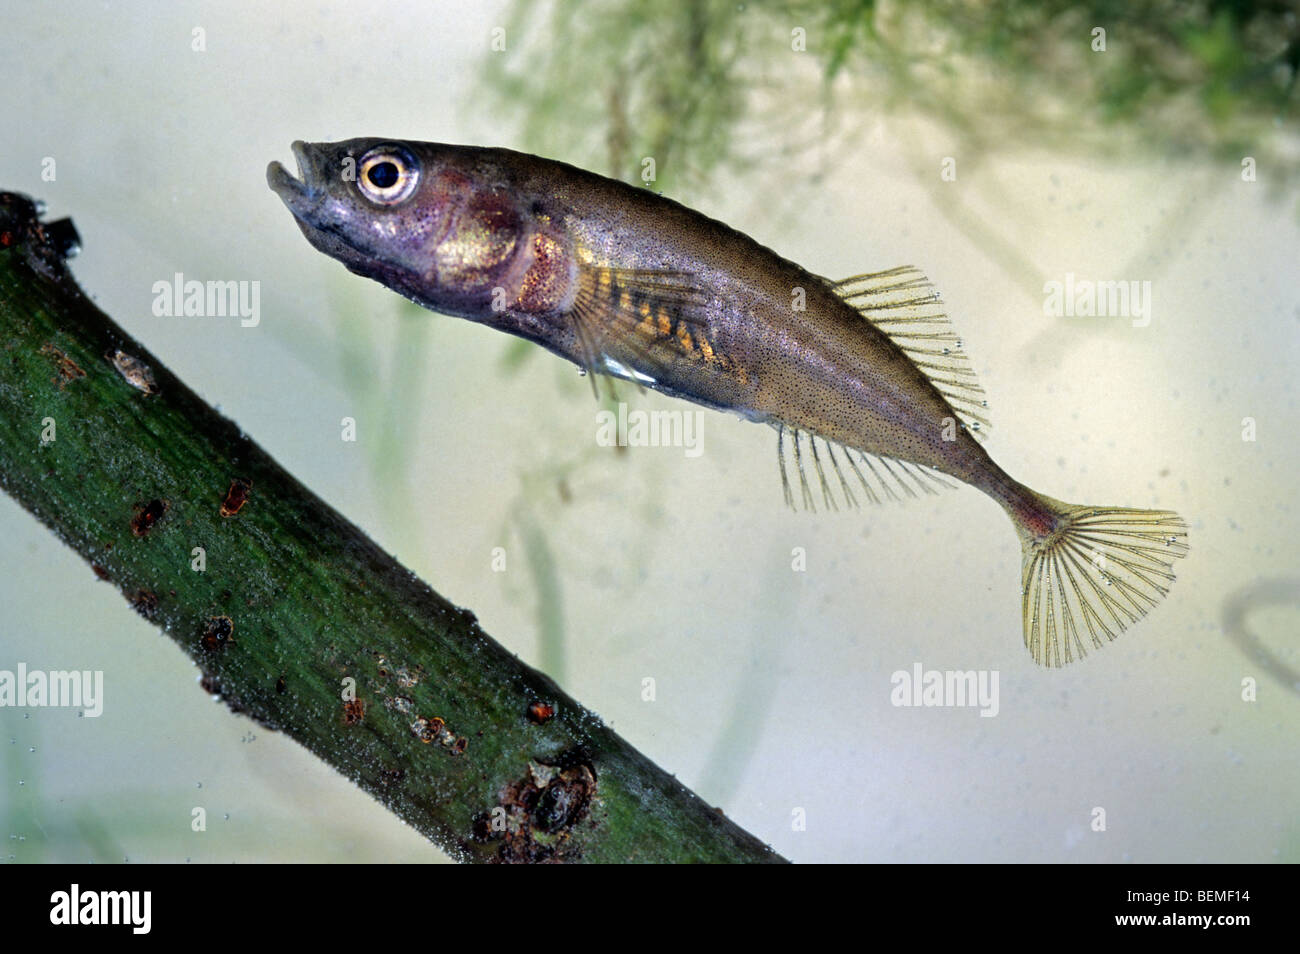 Three-spined stickleback (Gasterosteus aculeatus) swimming in pond Stock Photo